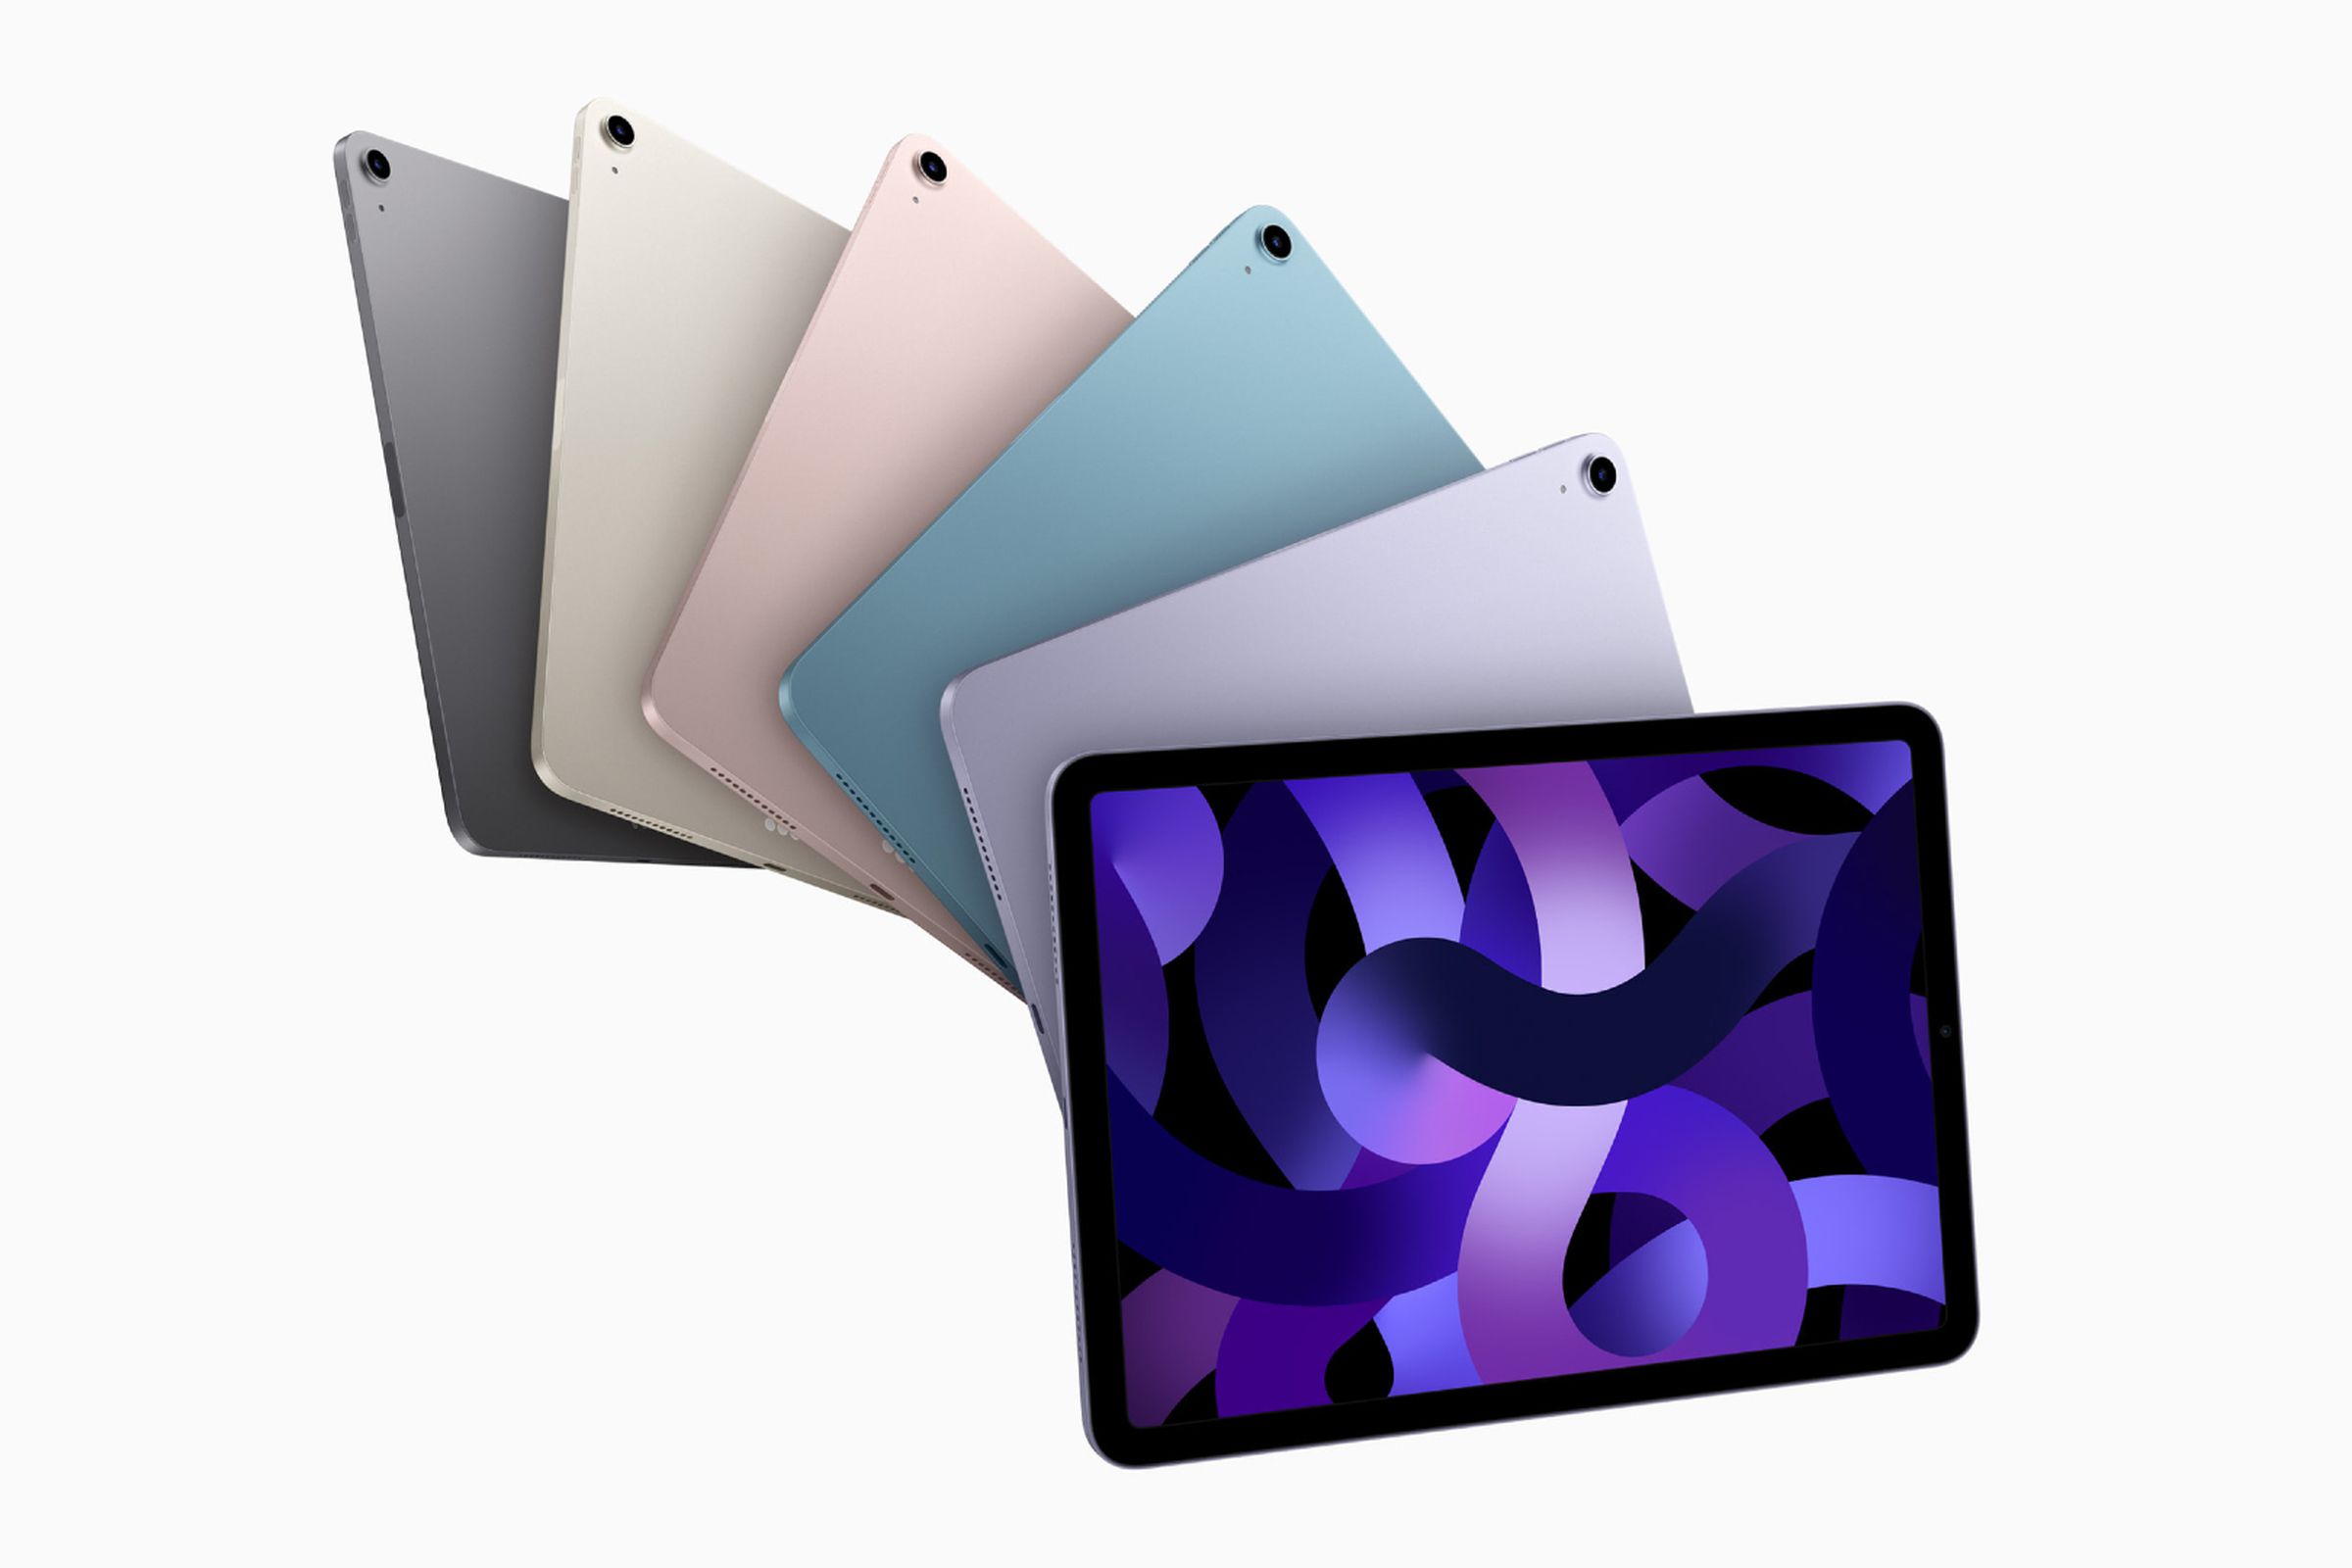 The new iPad Air comes in five colorways, including a new shade of blue.